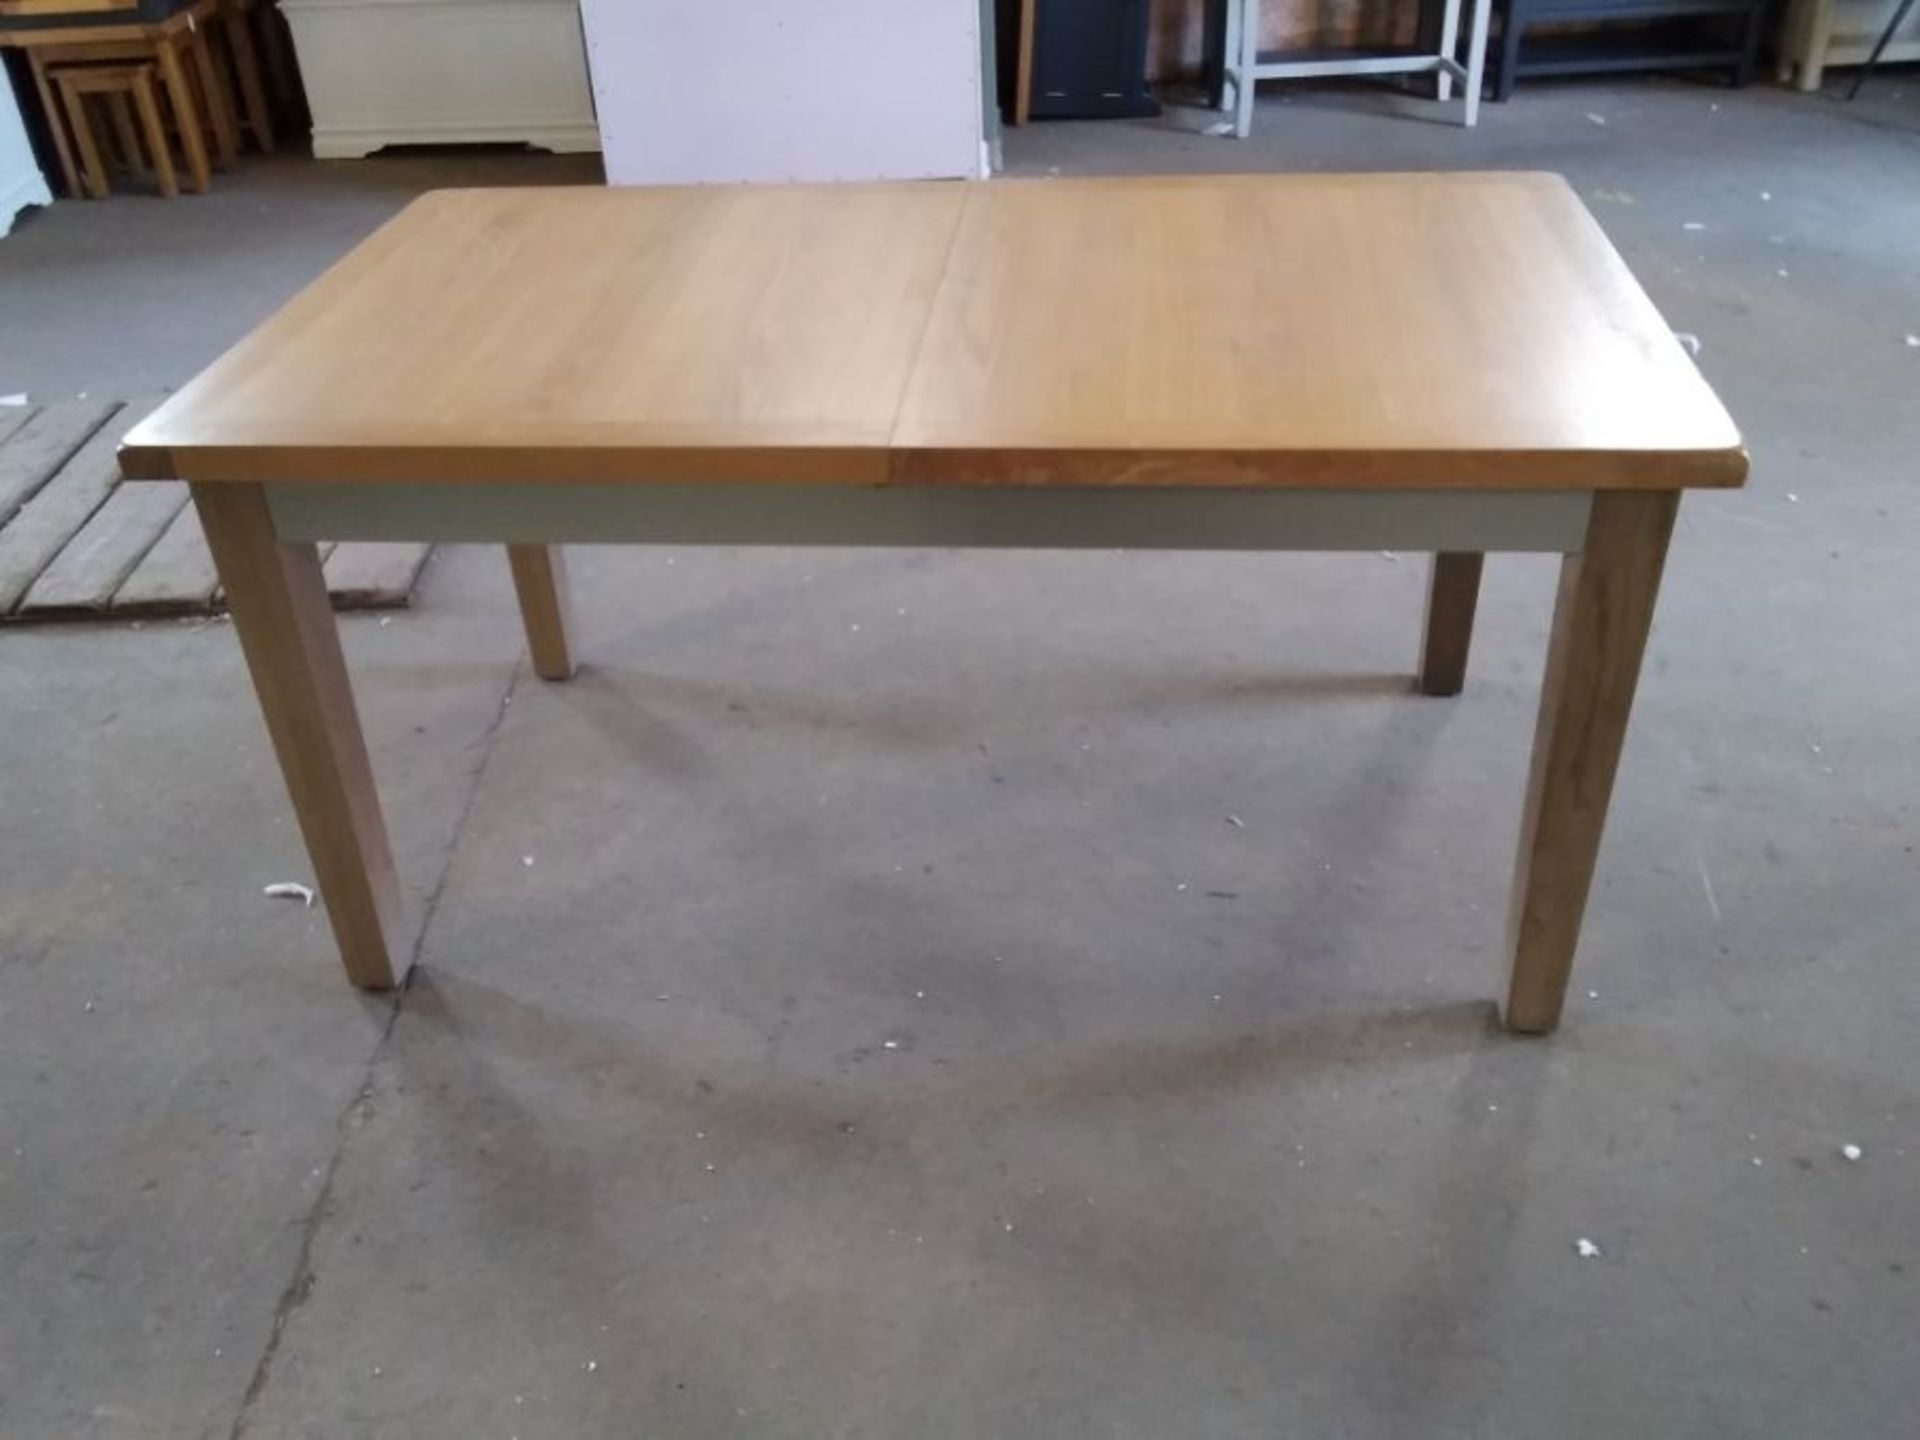 MISMATCHED EXTENDING DINING TABLE